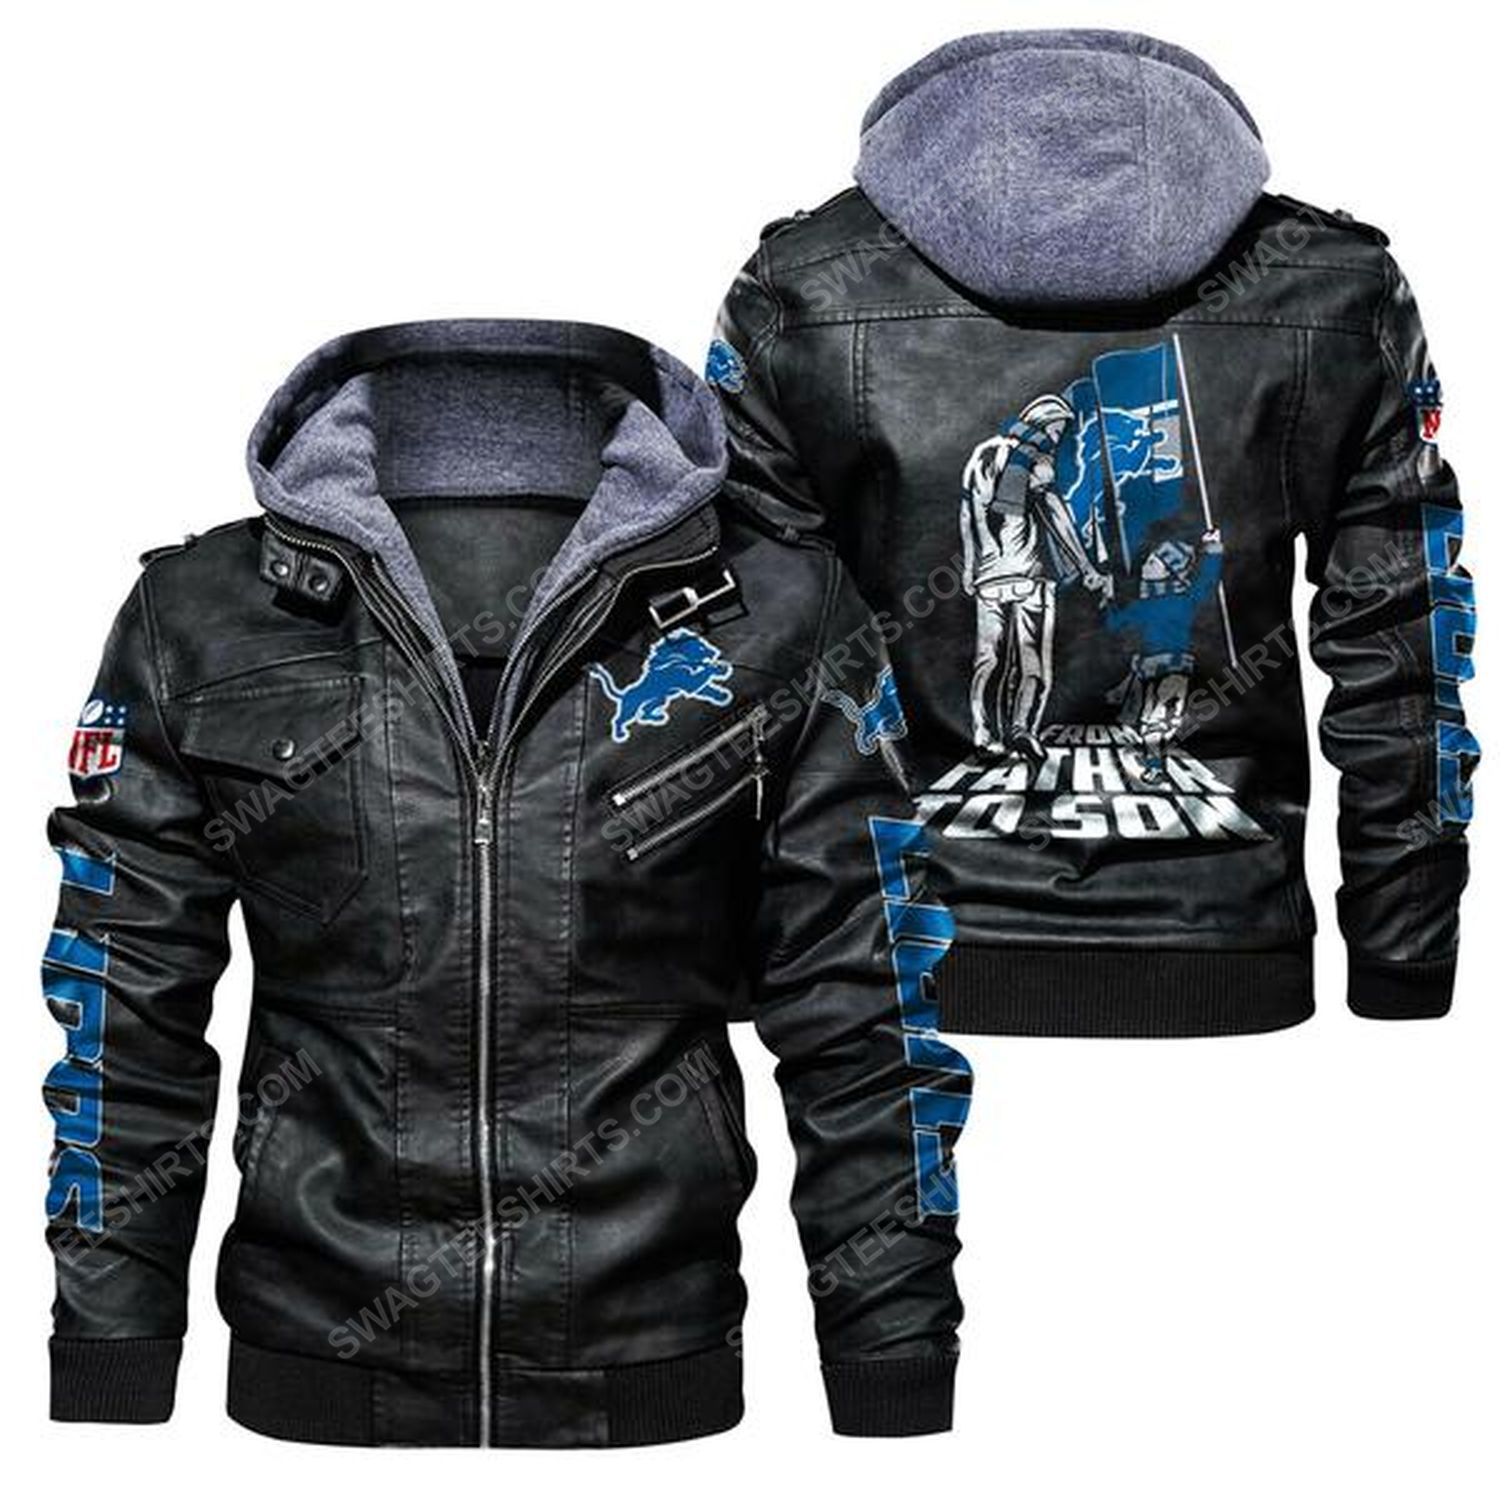 National football league detroit lions from father to son leather jacket - black